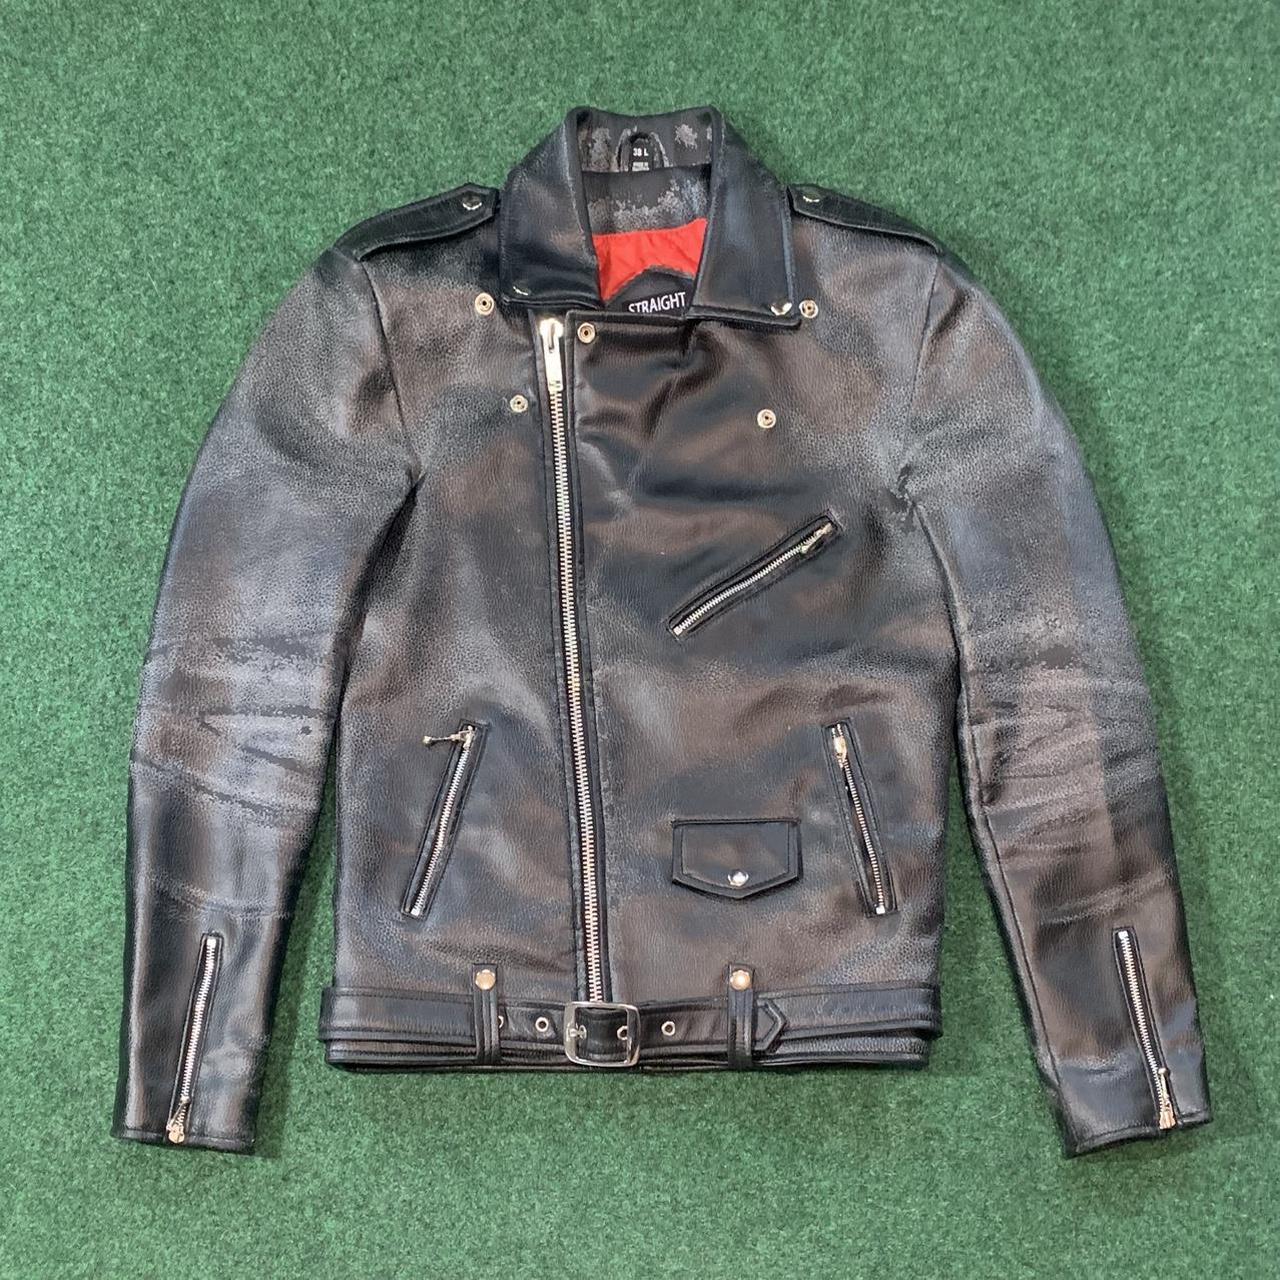 Straight to Hell Men's Commando Leather Jacket